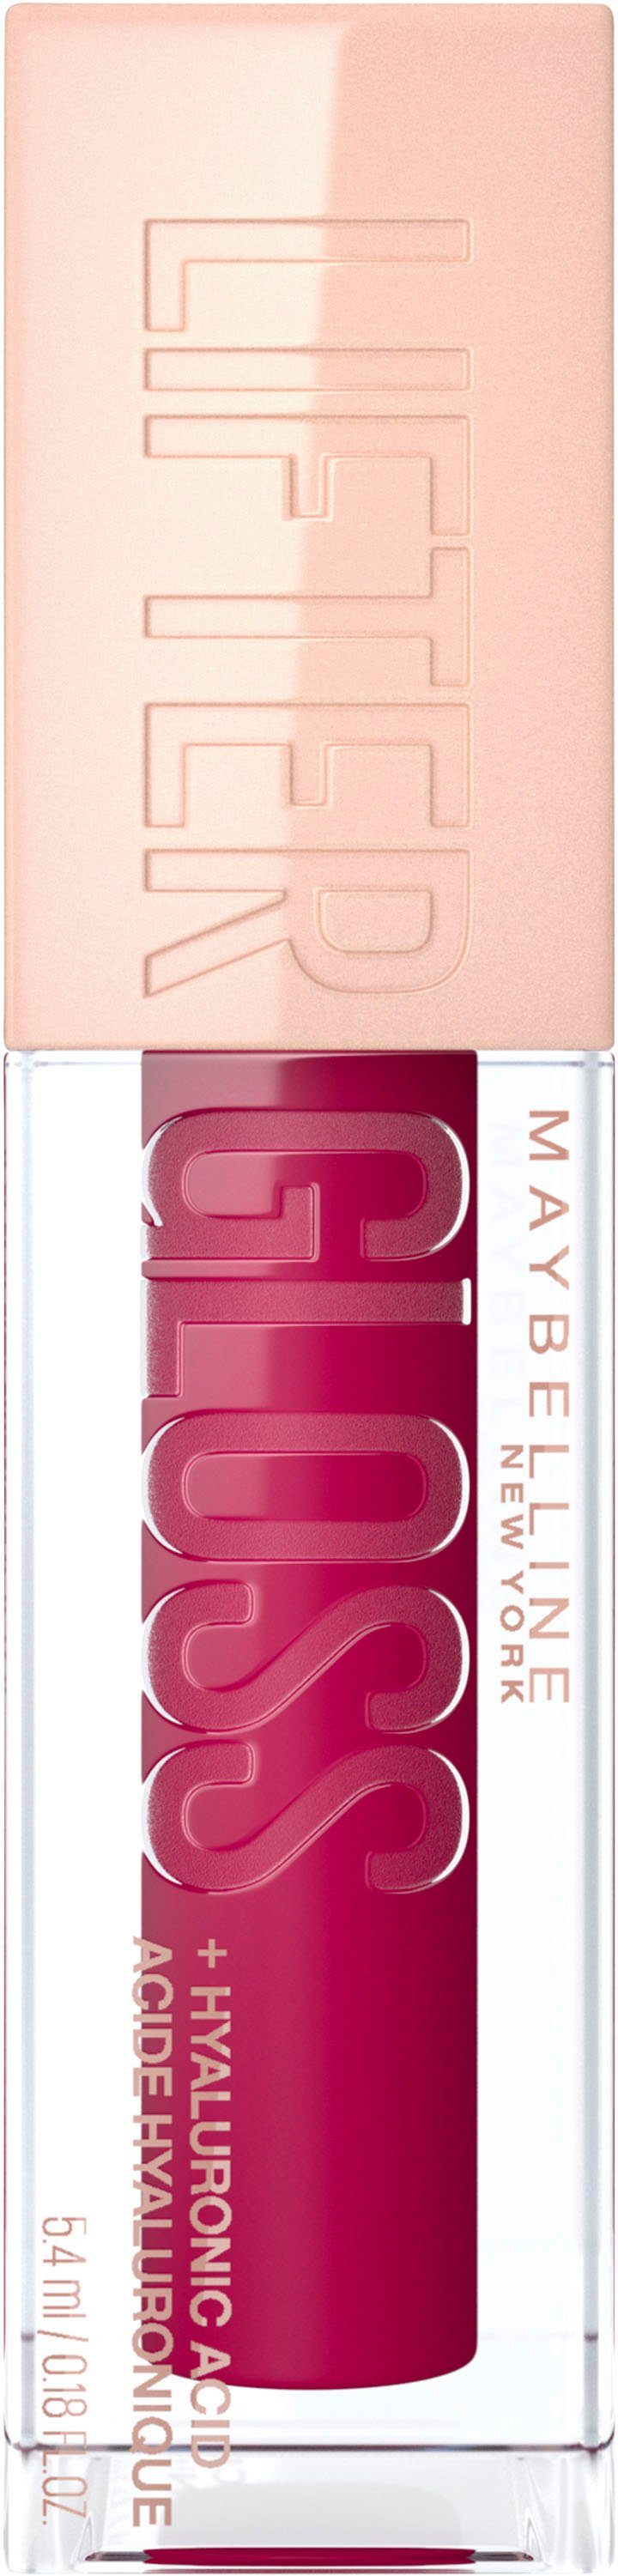 NEW Gloss Maybelline MAYBELLINE YORK Lipgloss New York Lifter